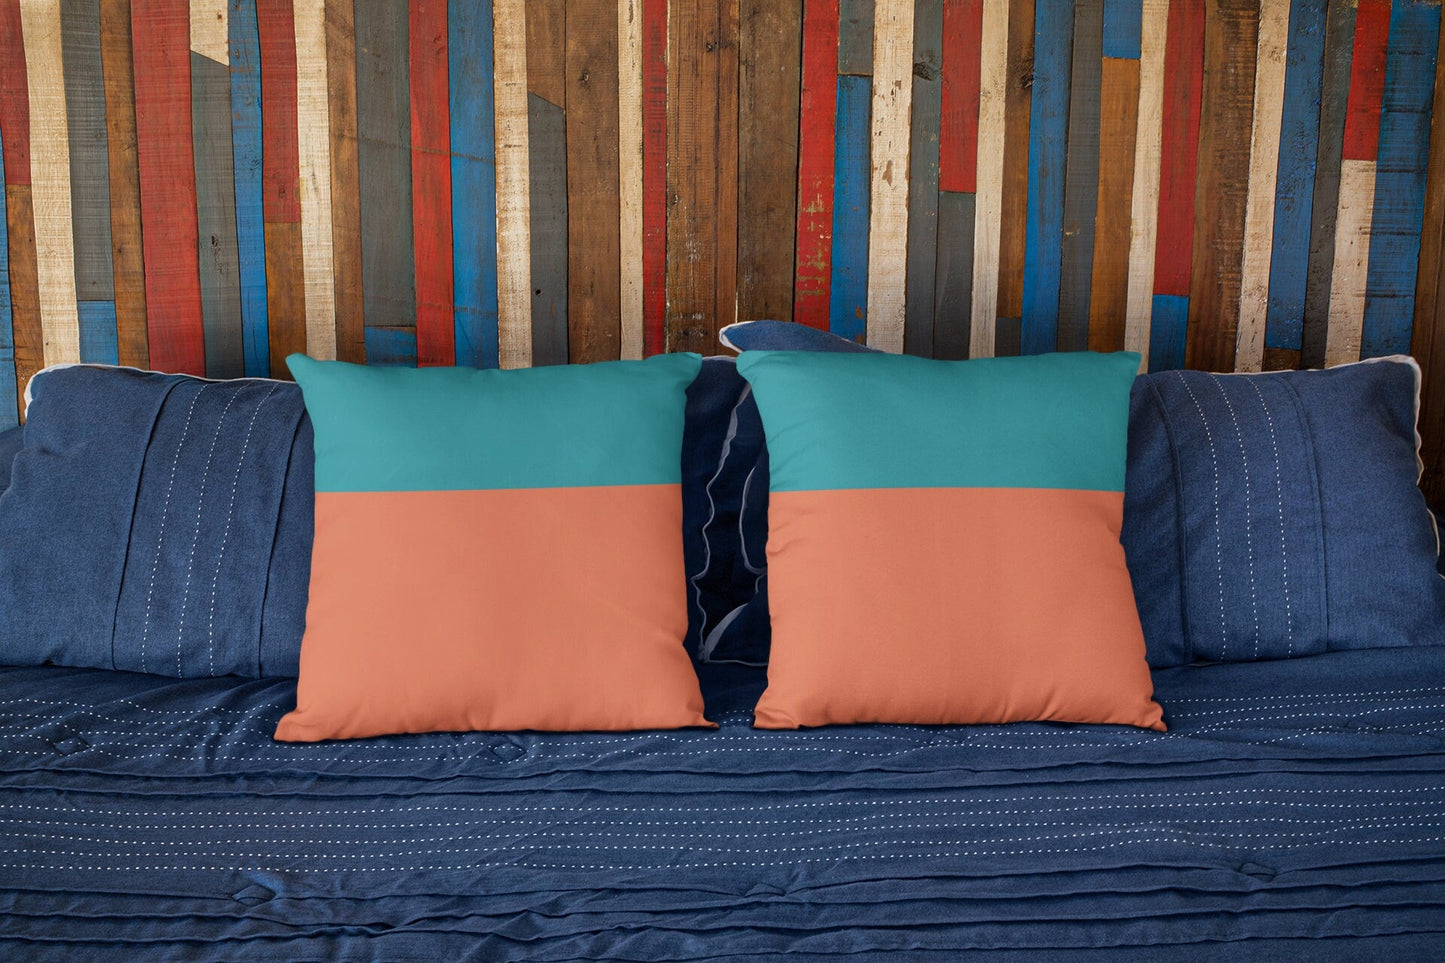 Teal Blue and Terracotta Pillow Cover